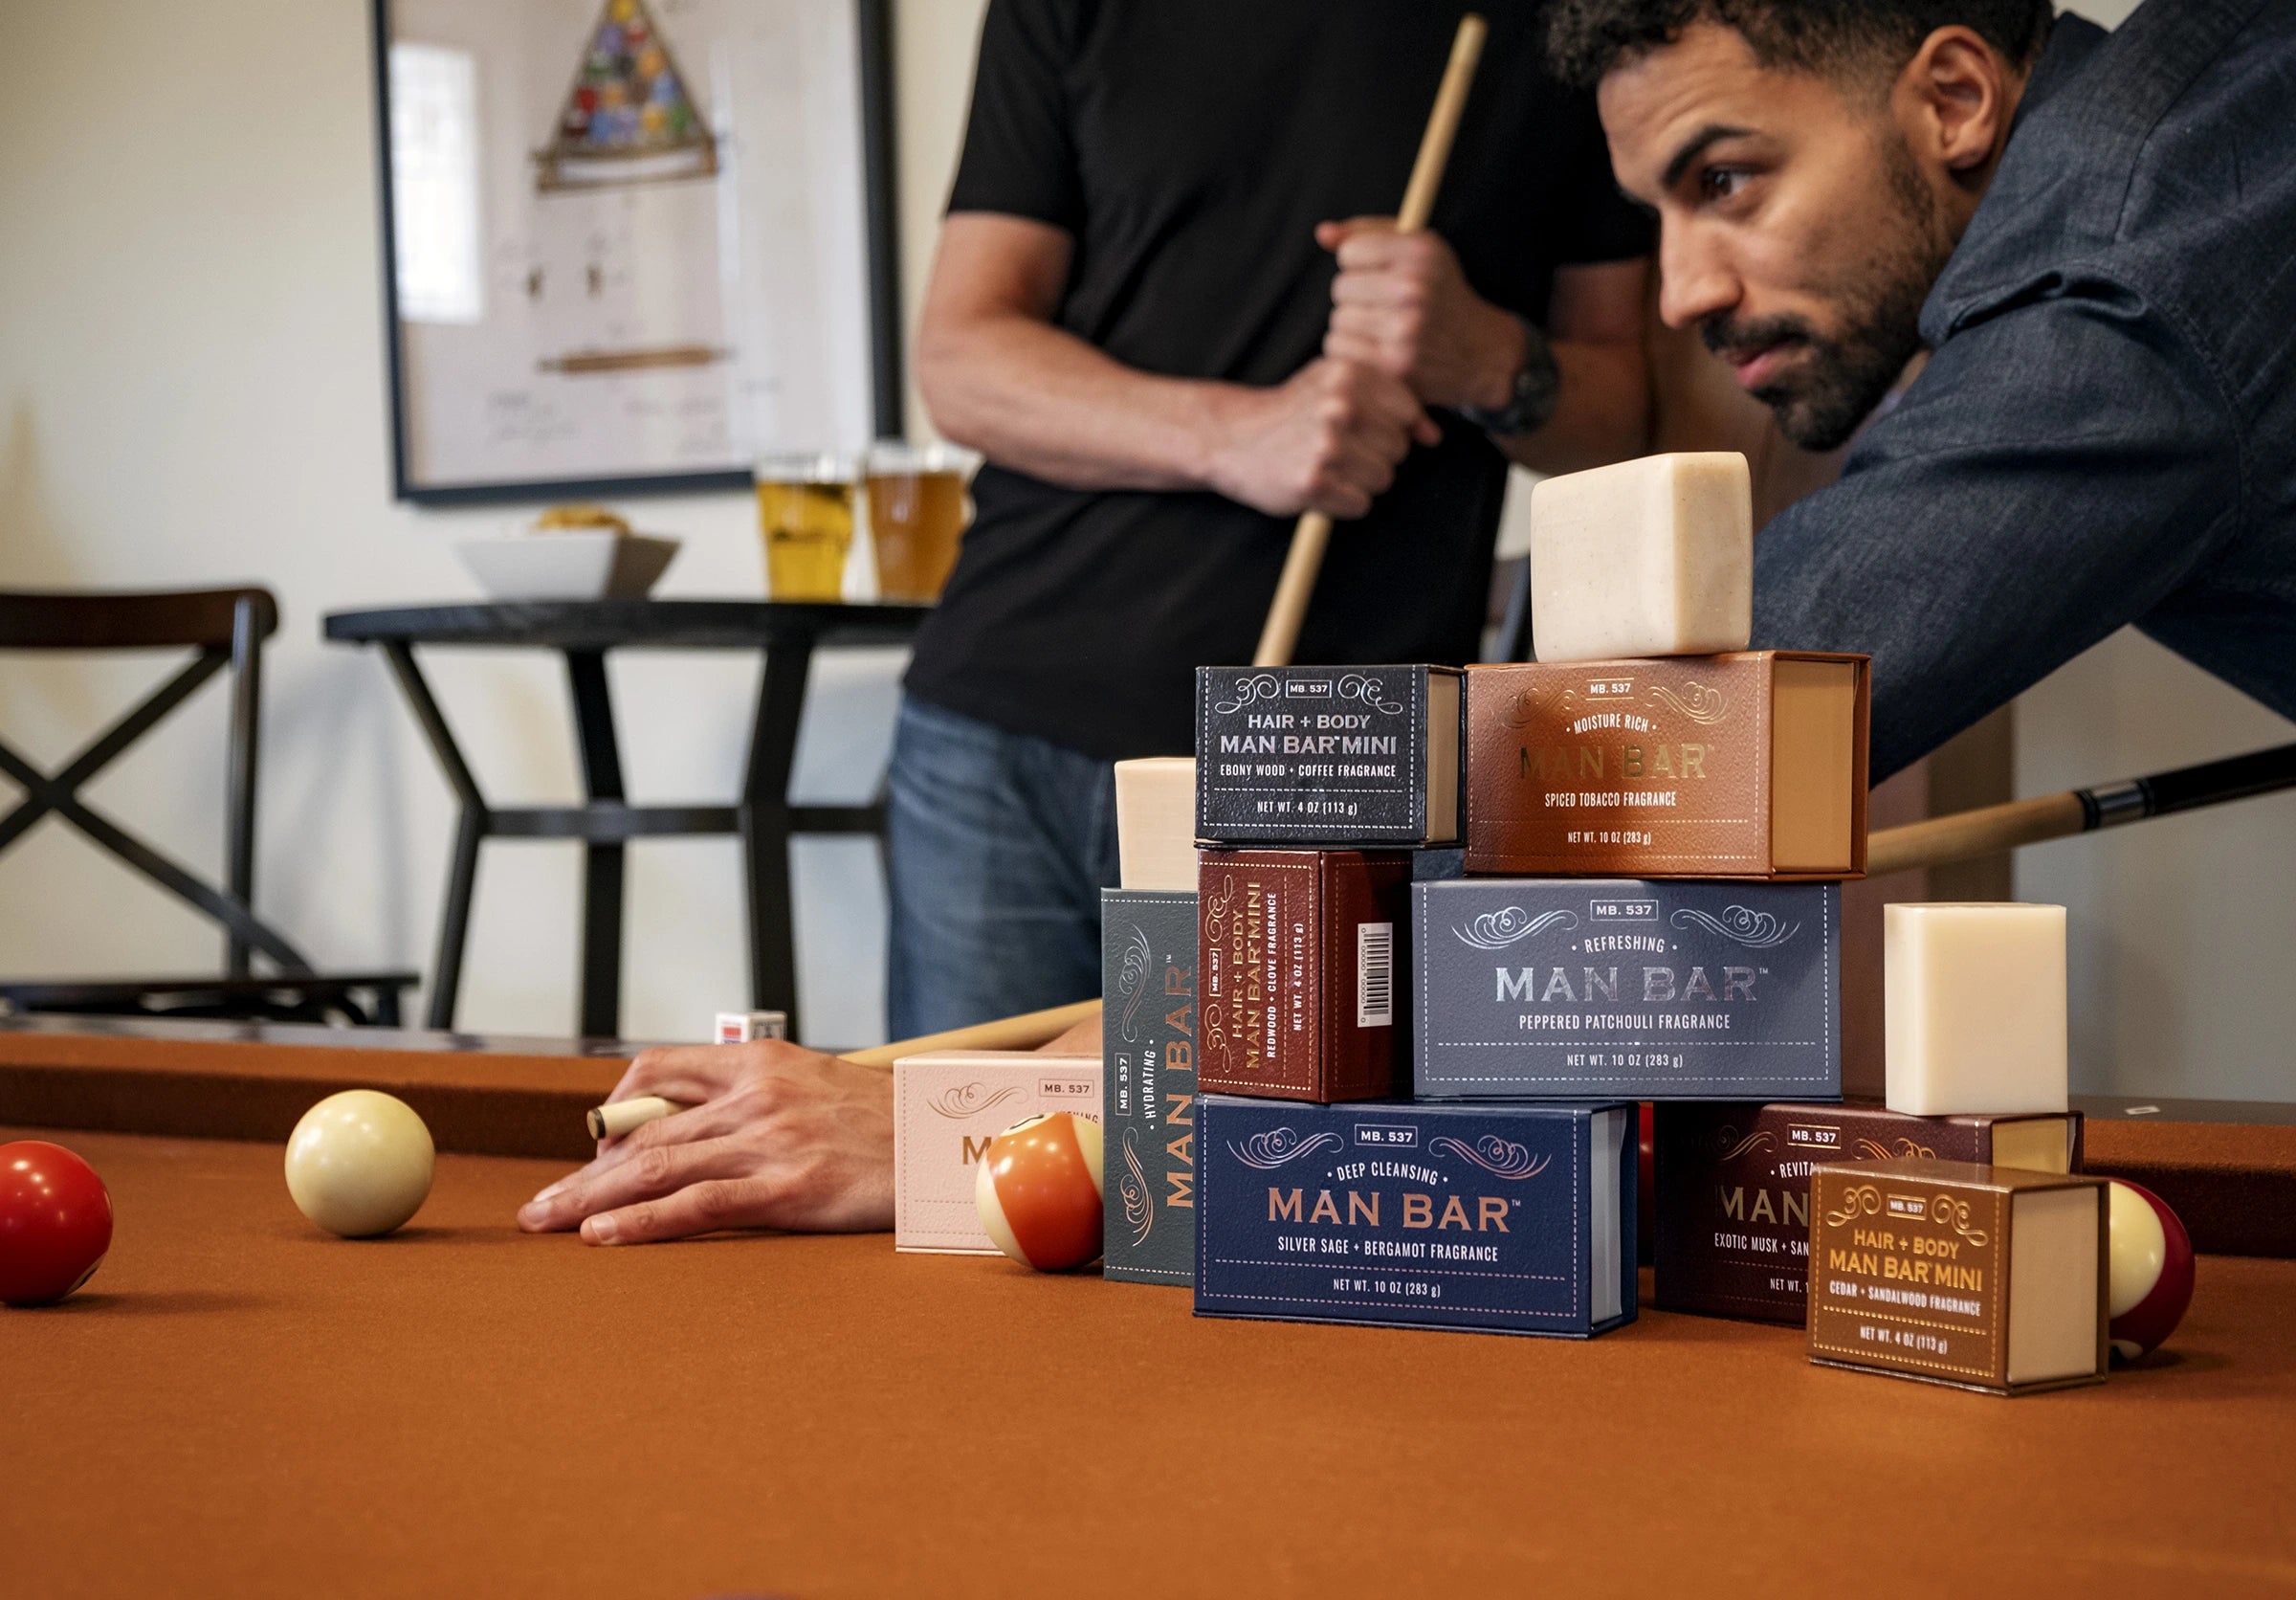 An arrangement of Man Bar products stacked on a pool table with men playing billiards in the background